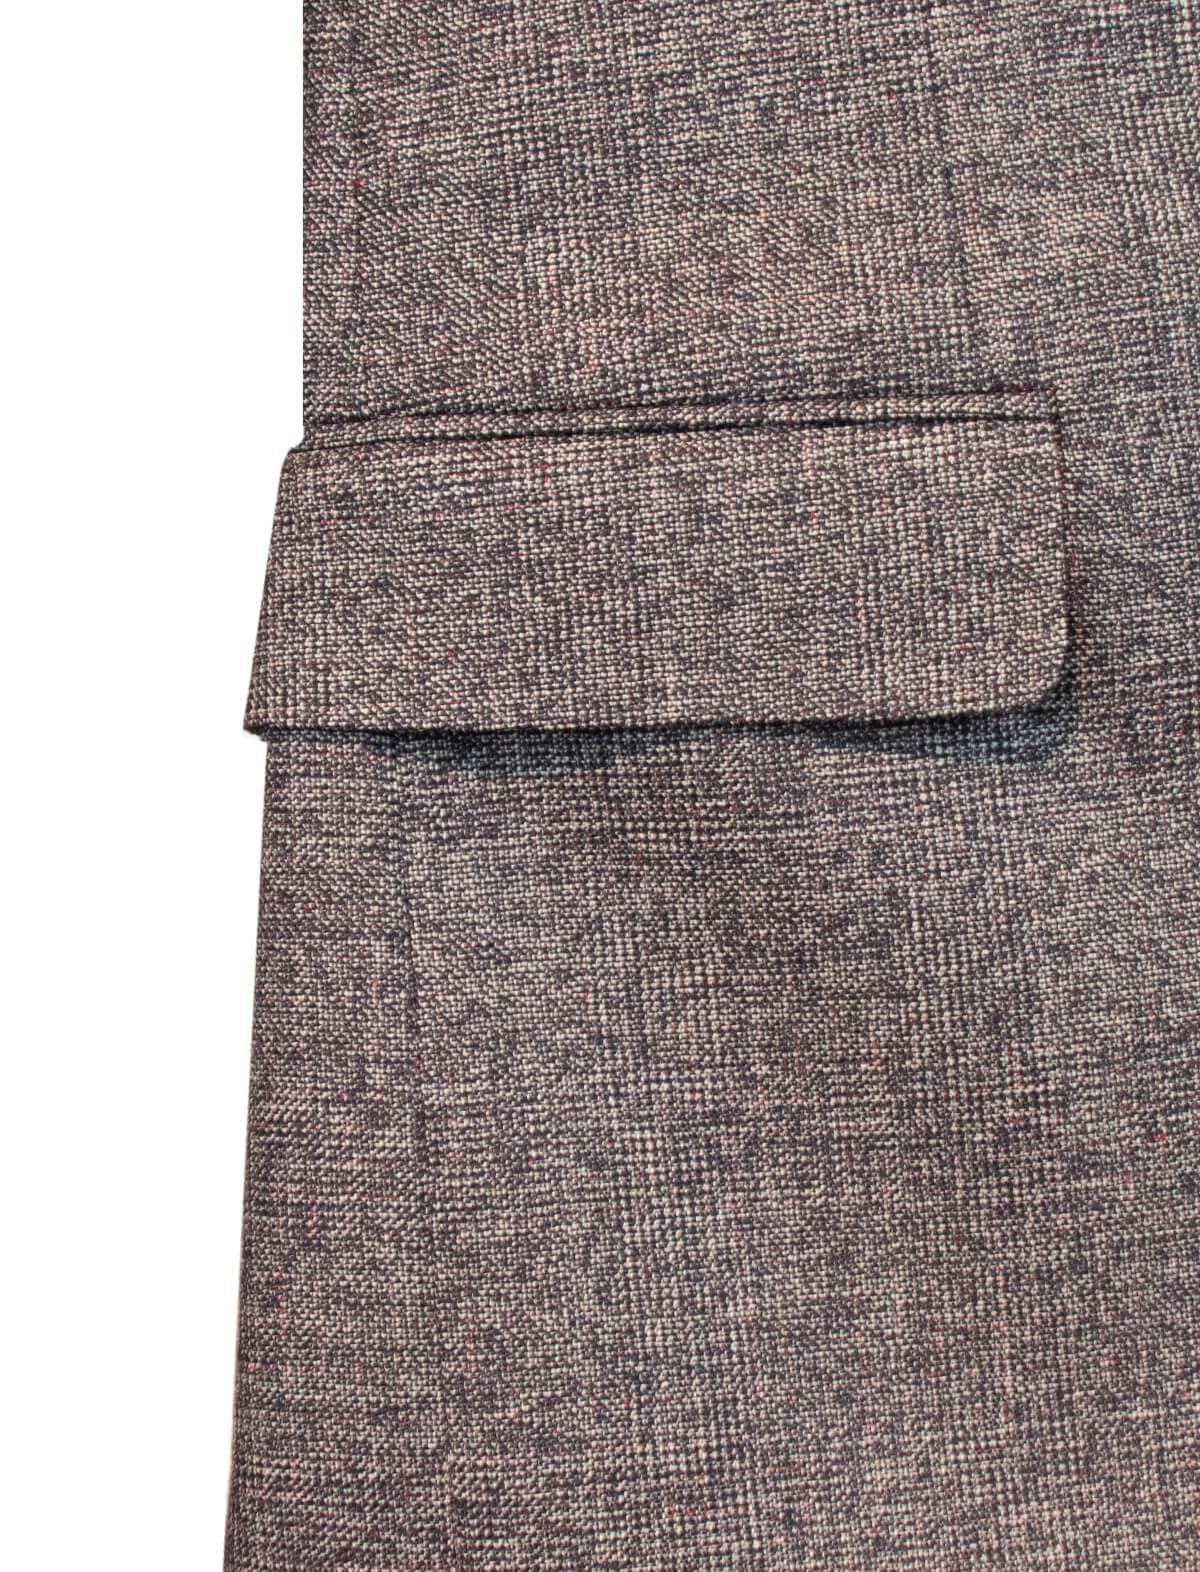 CARUSO 2-Piece Aida Wool Suit in Brown Black | CLOSET Singapore